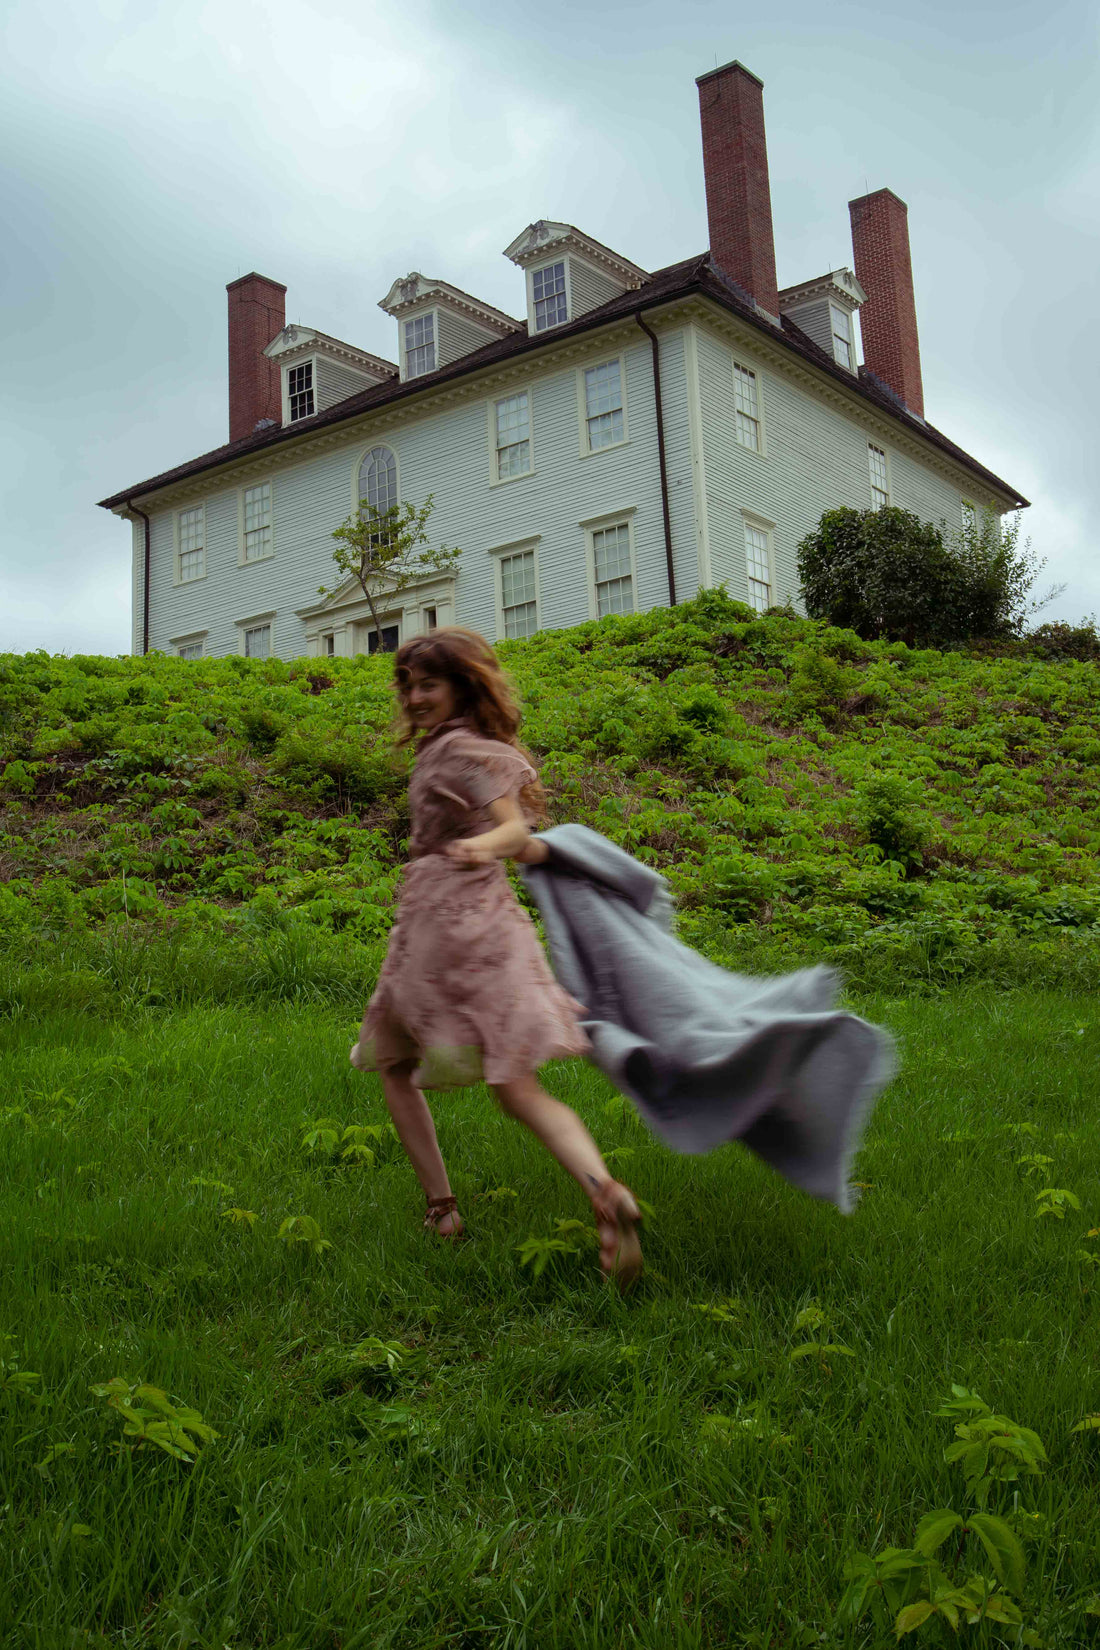 A woman running with a dawn / light blue / mohair throw blanket. A historic house sit up on a hill in the distance. 